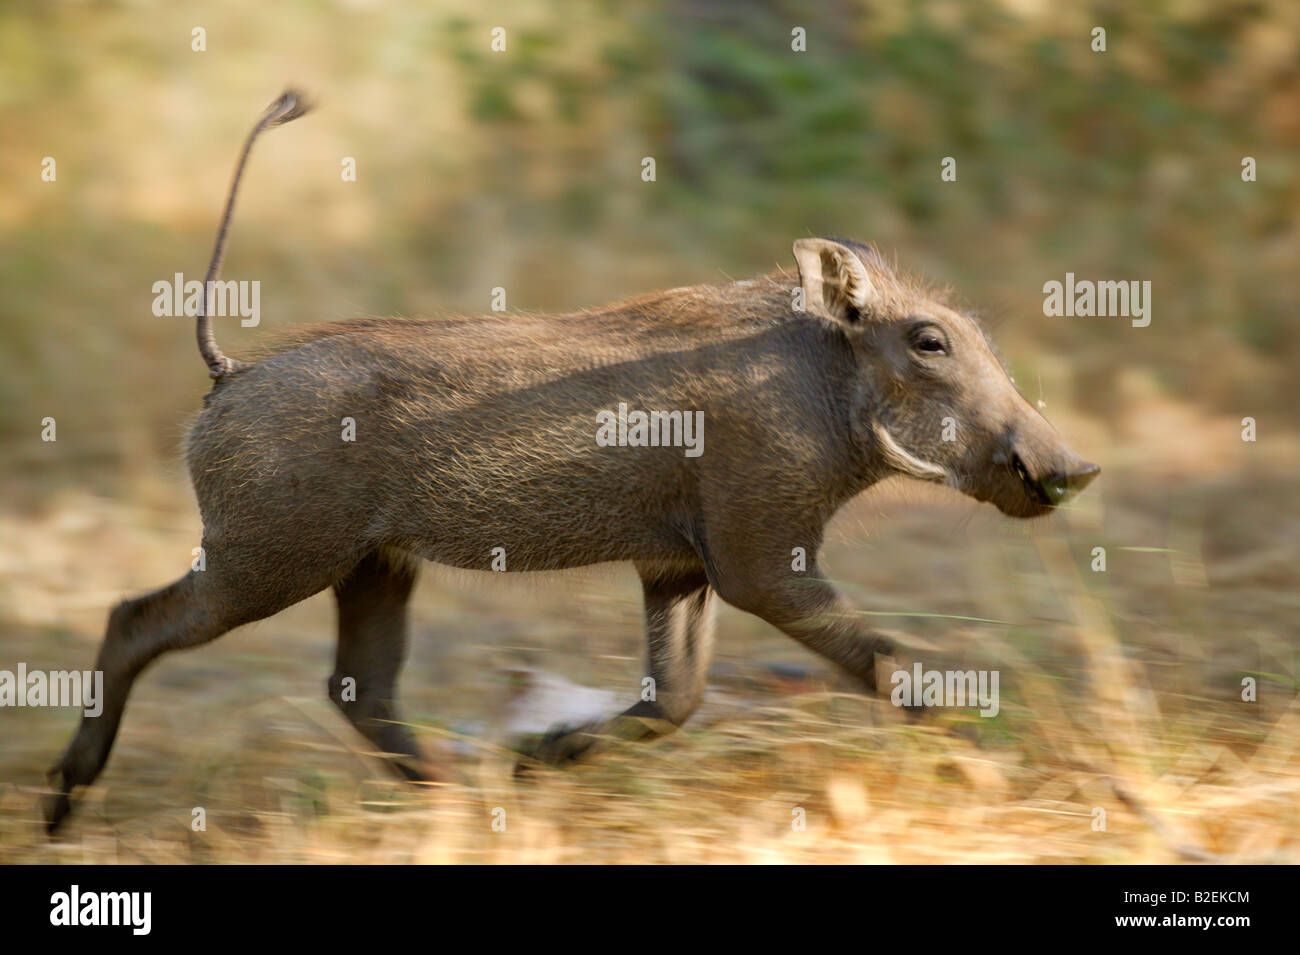 A warthog piglet running with tail held upright Stock Photo